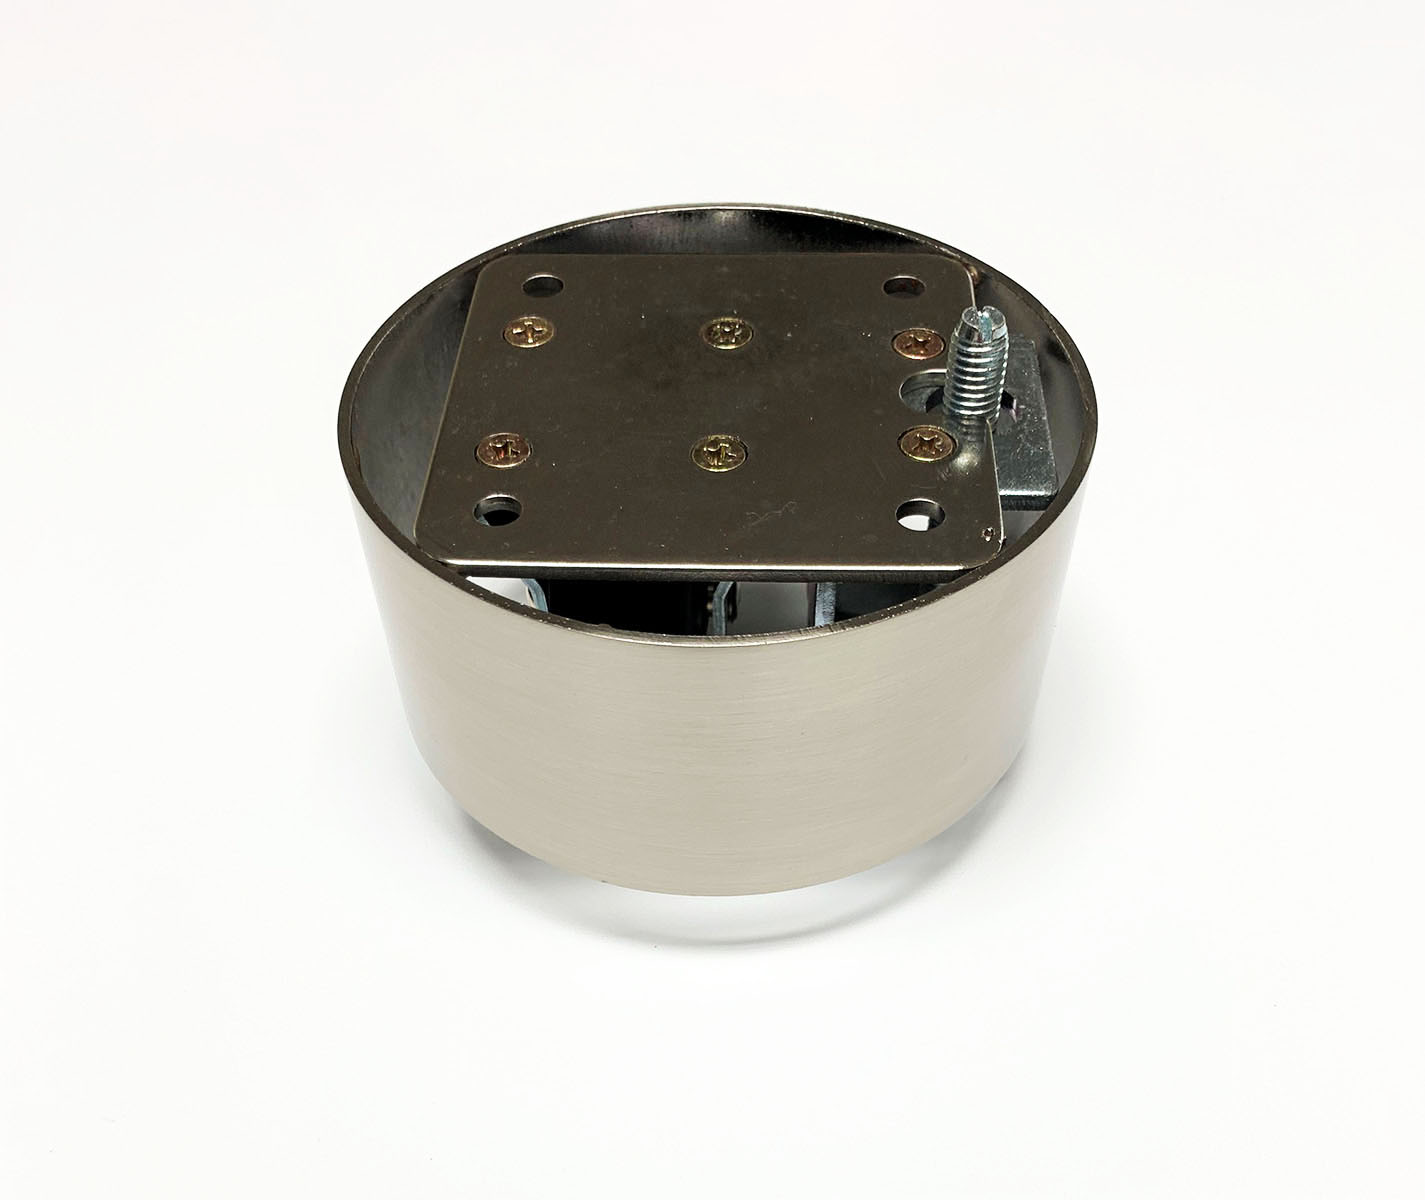 Round metal base with caster wheel and adjustable leveler